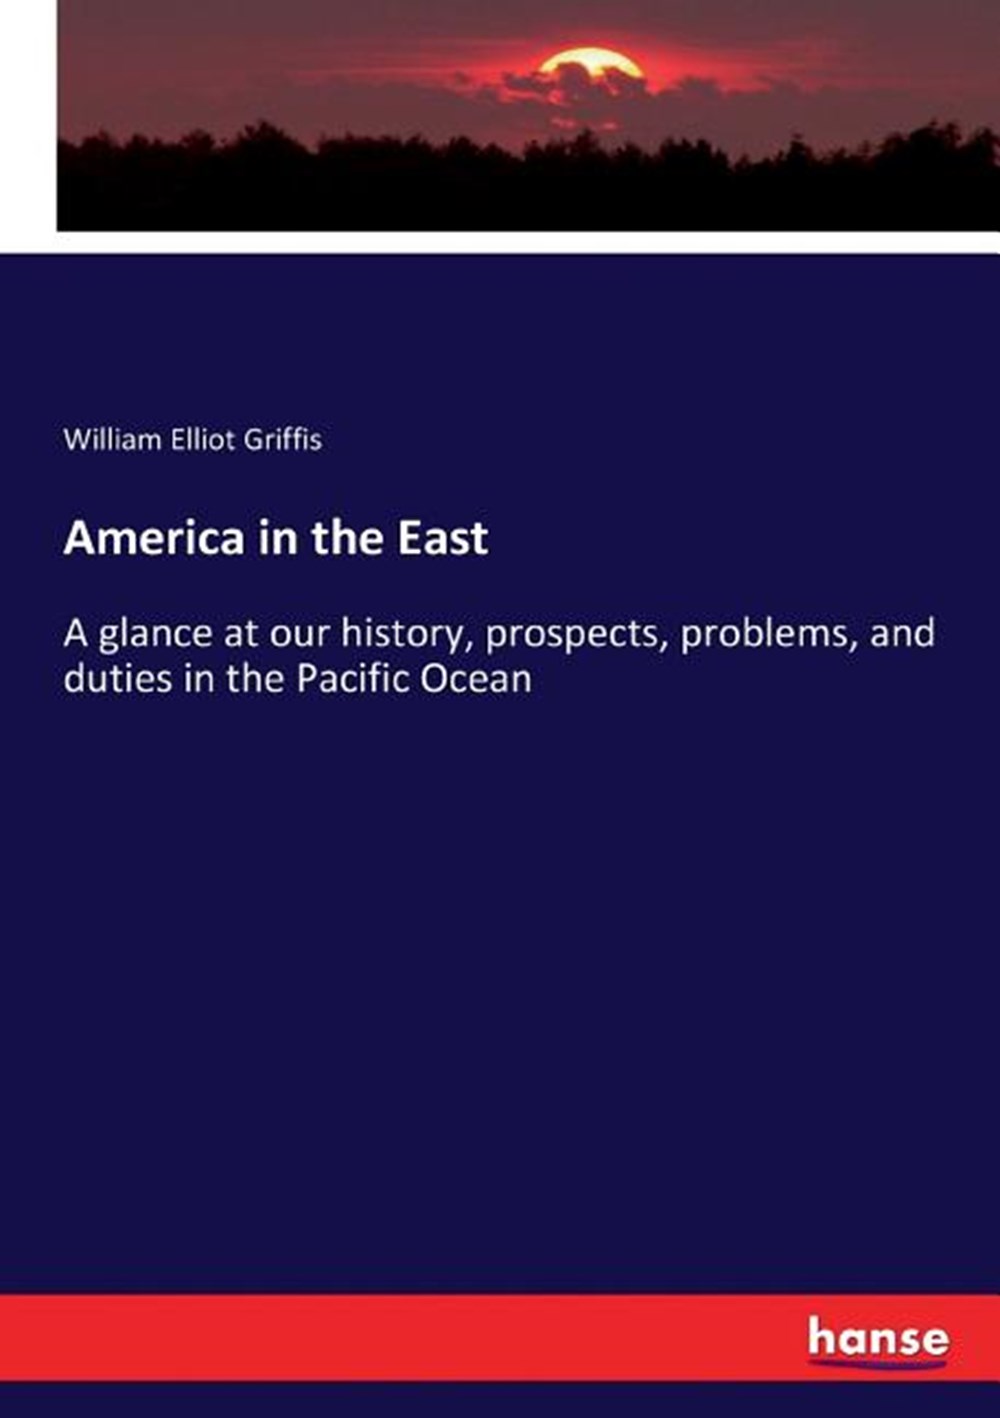 America in the East: A glance at our history, prospects, problems, and duties in the Pacific Ocean